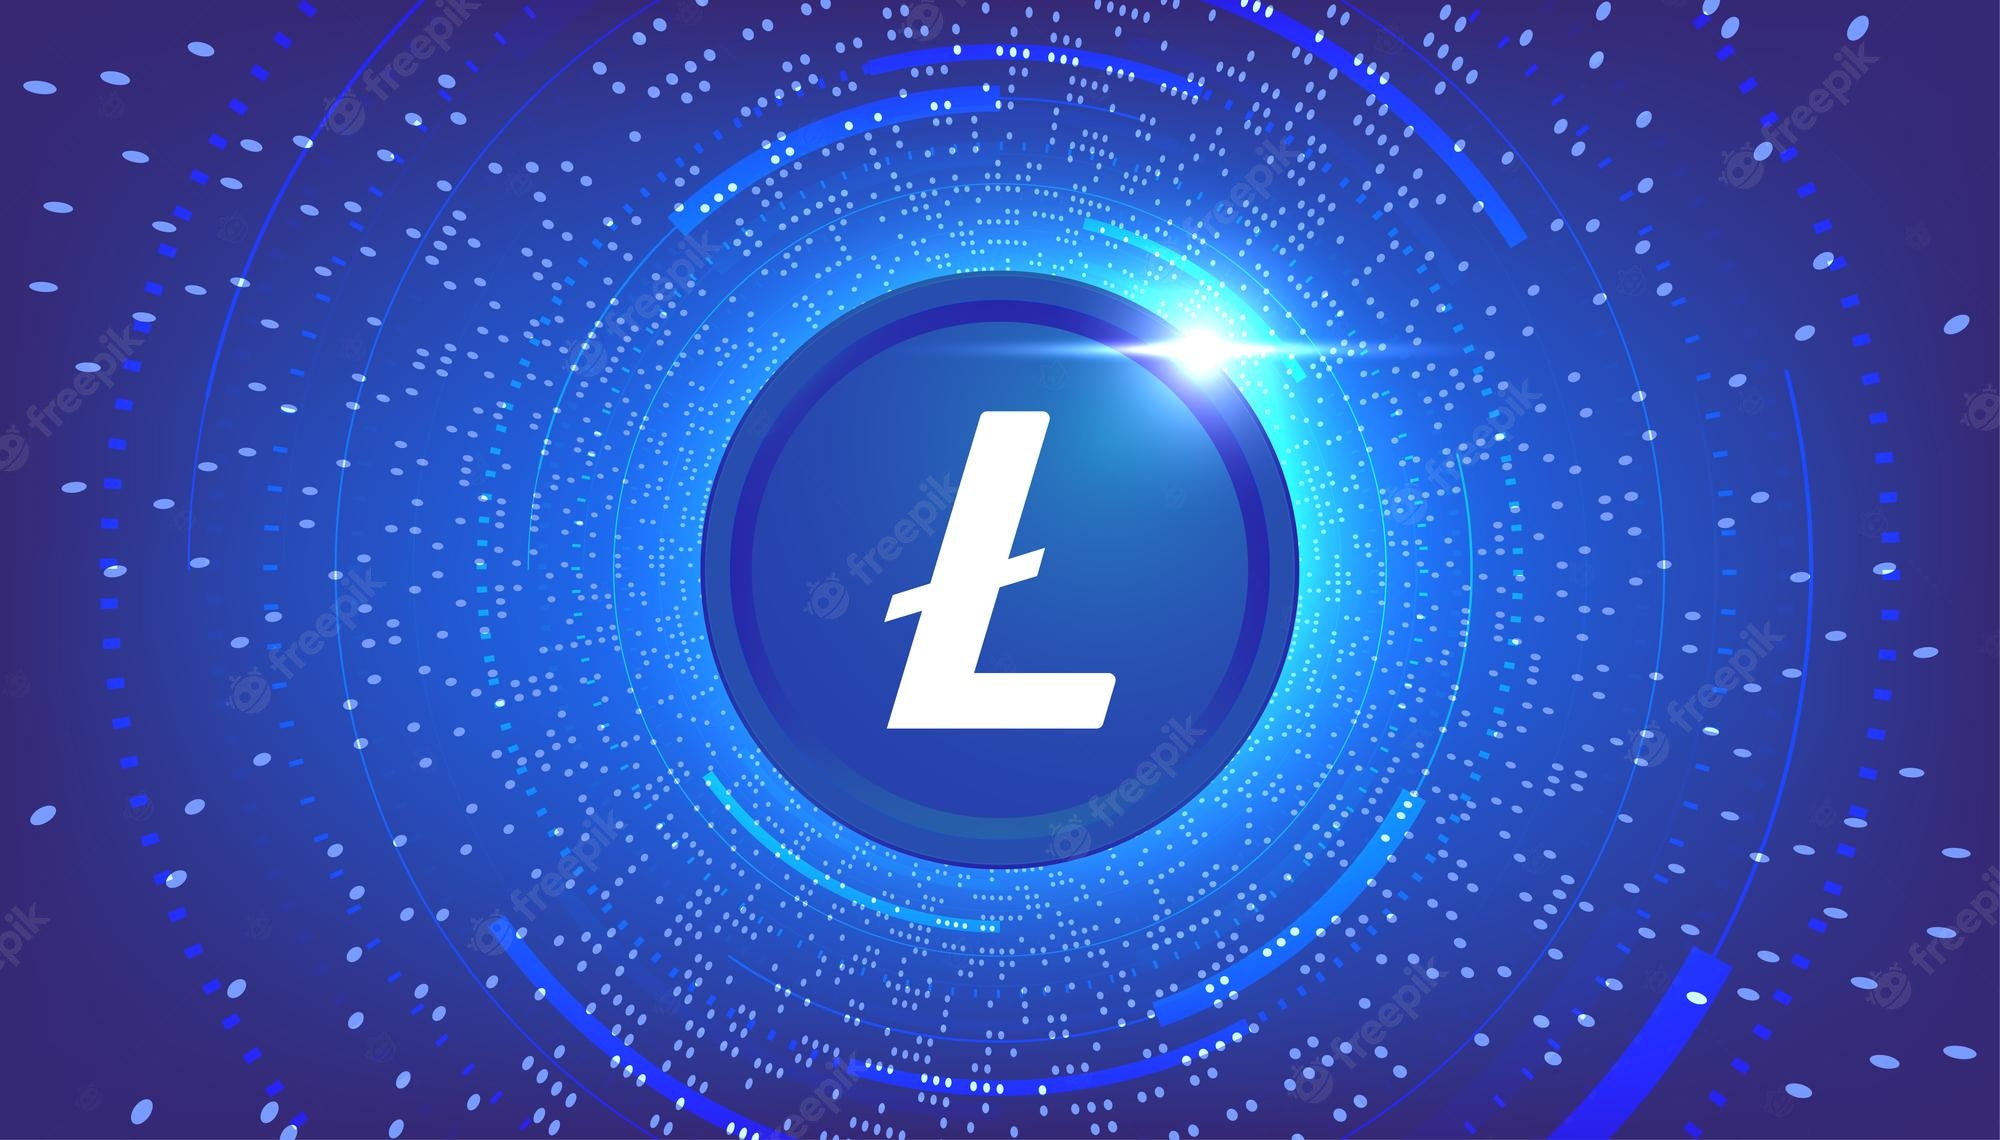 Litecoin SV price today, LSV to USD live price, marketcap and chart | CoinMarketCap